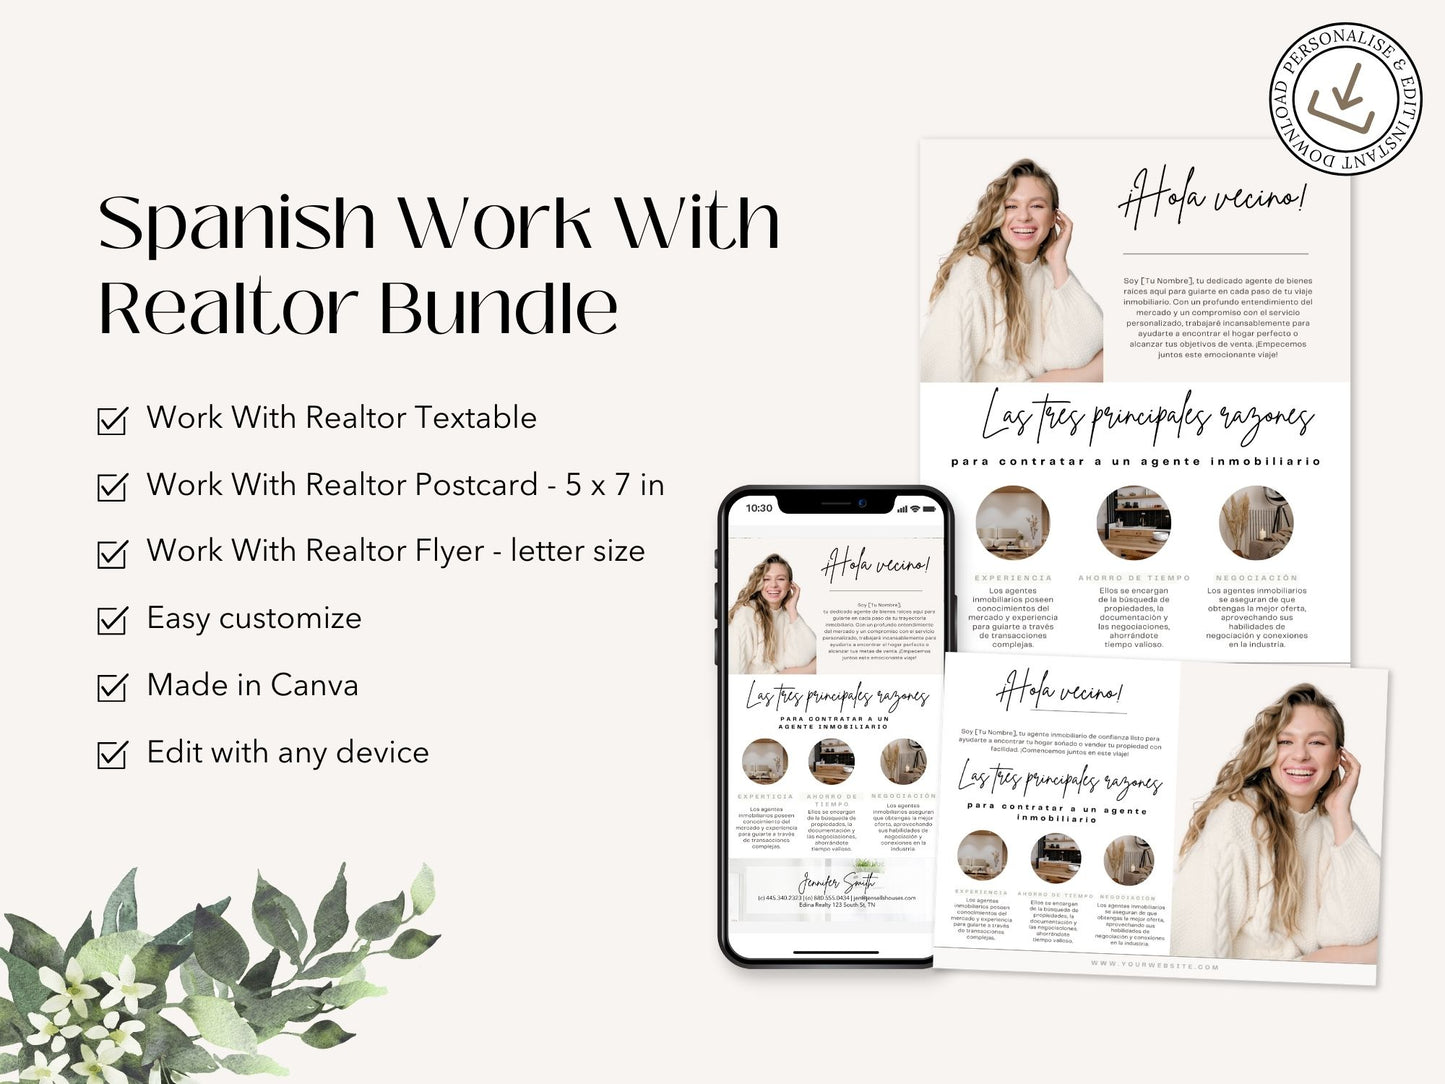 Spanish Work With Realtor Bundle - Essential resources for Spanish-speaking clients.